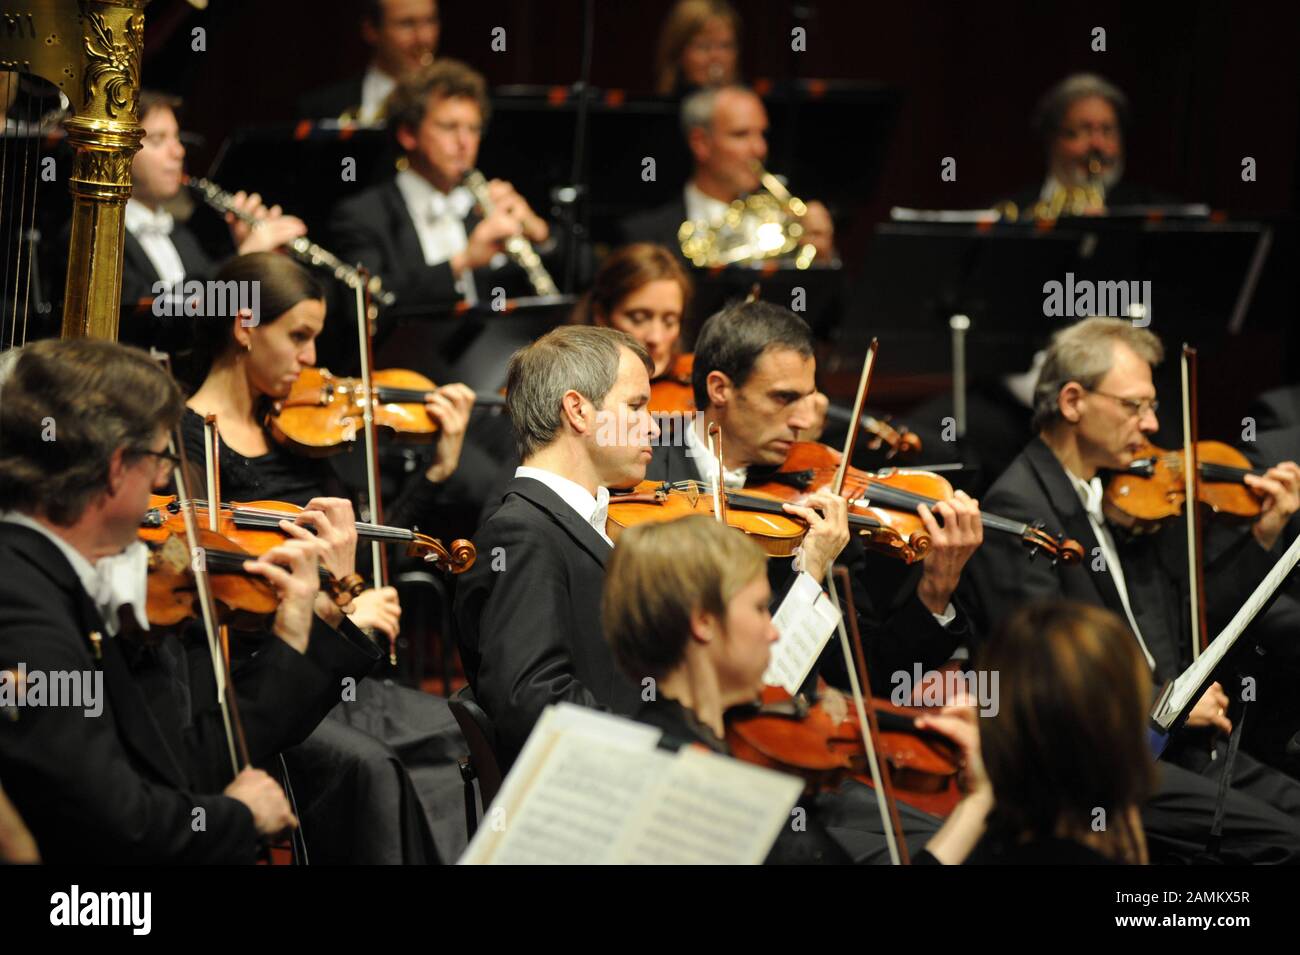 65th anniversary of 'Advent Calendar for Good Works' of the Süddeutsche Zeitung: Benefit concert of the Bavarian Radio Symphony Orchestra in the Munich Prinzregententheater. [automated translation] Stock Photo